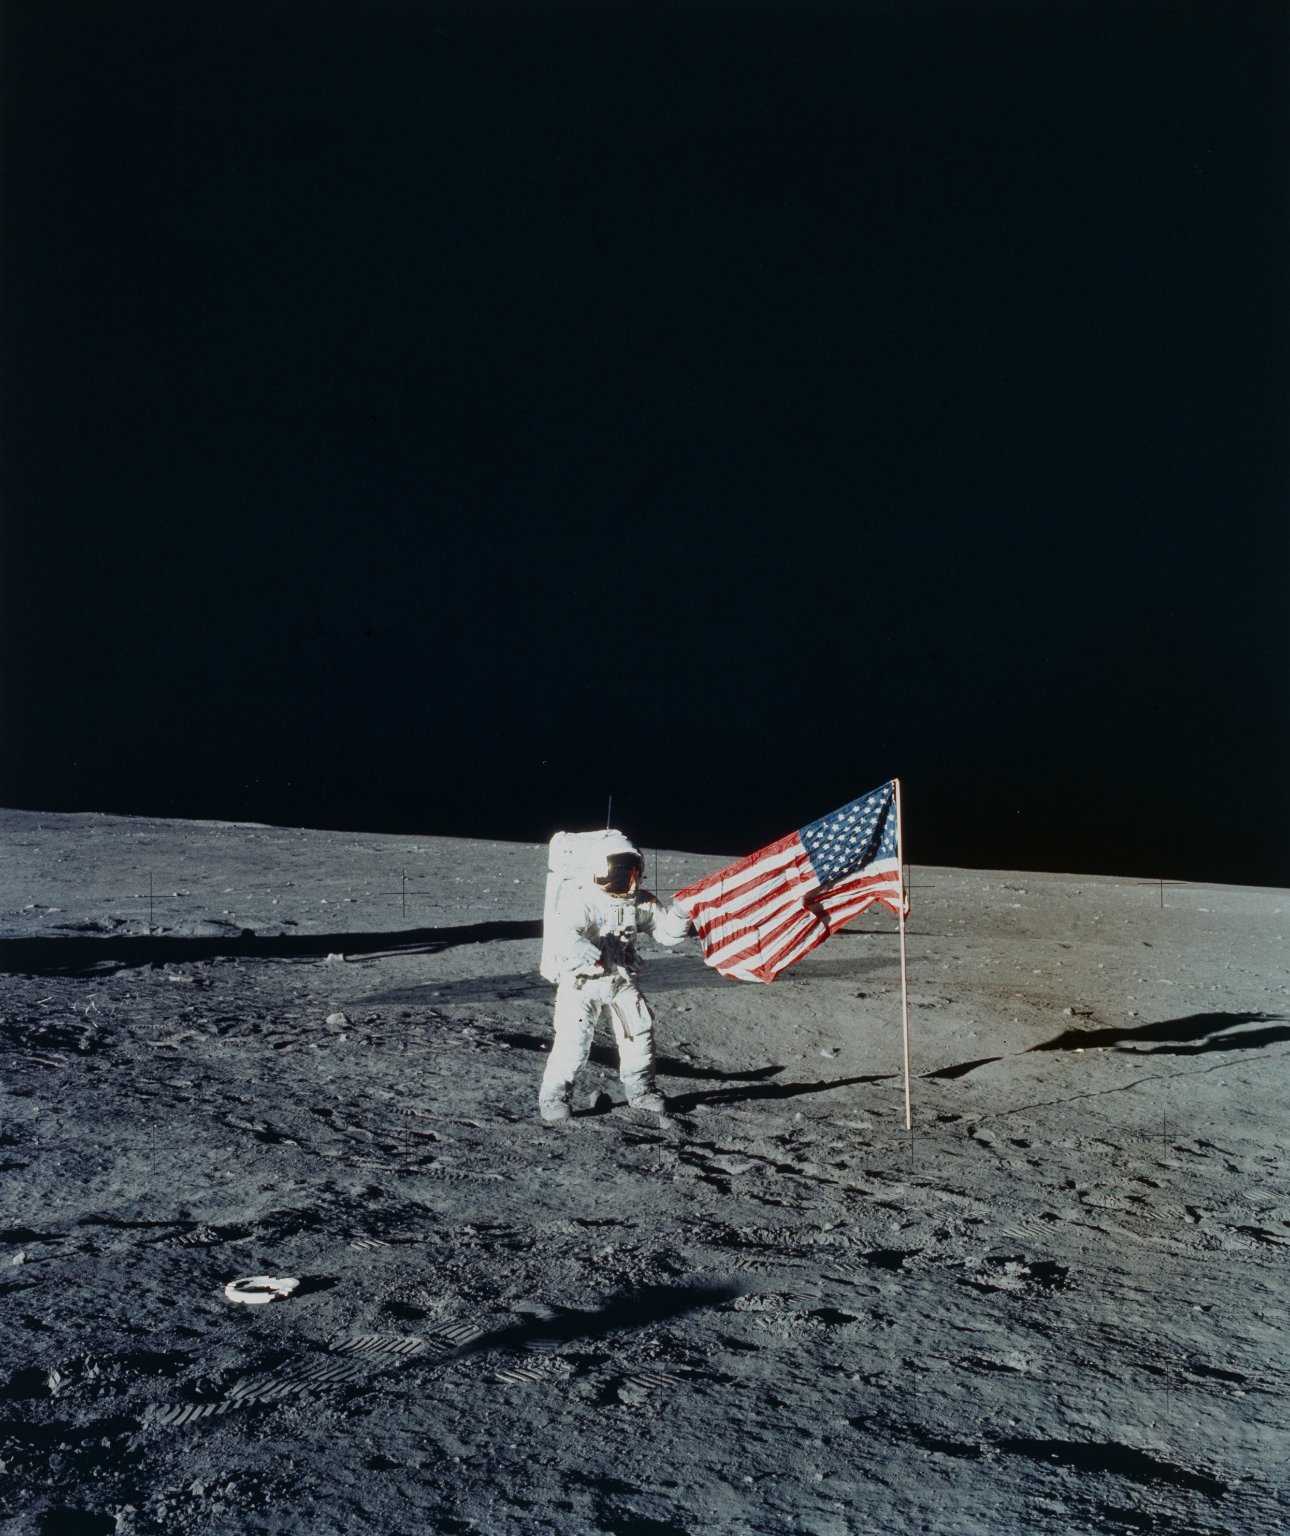 What turned into of the flags Apollo astronauts left at the moon?